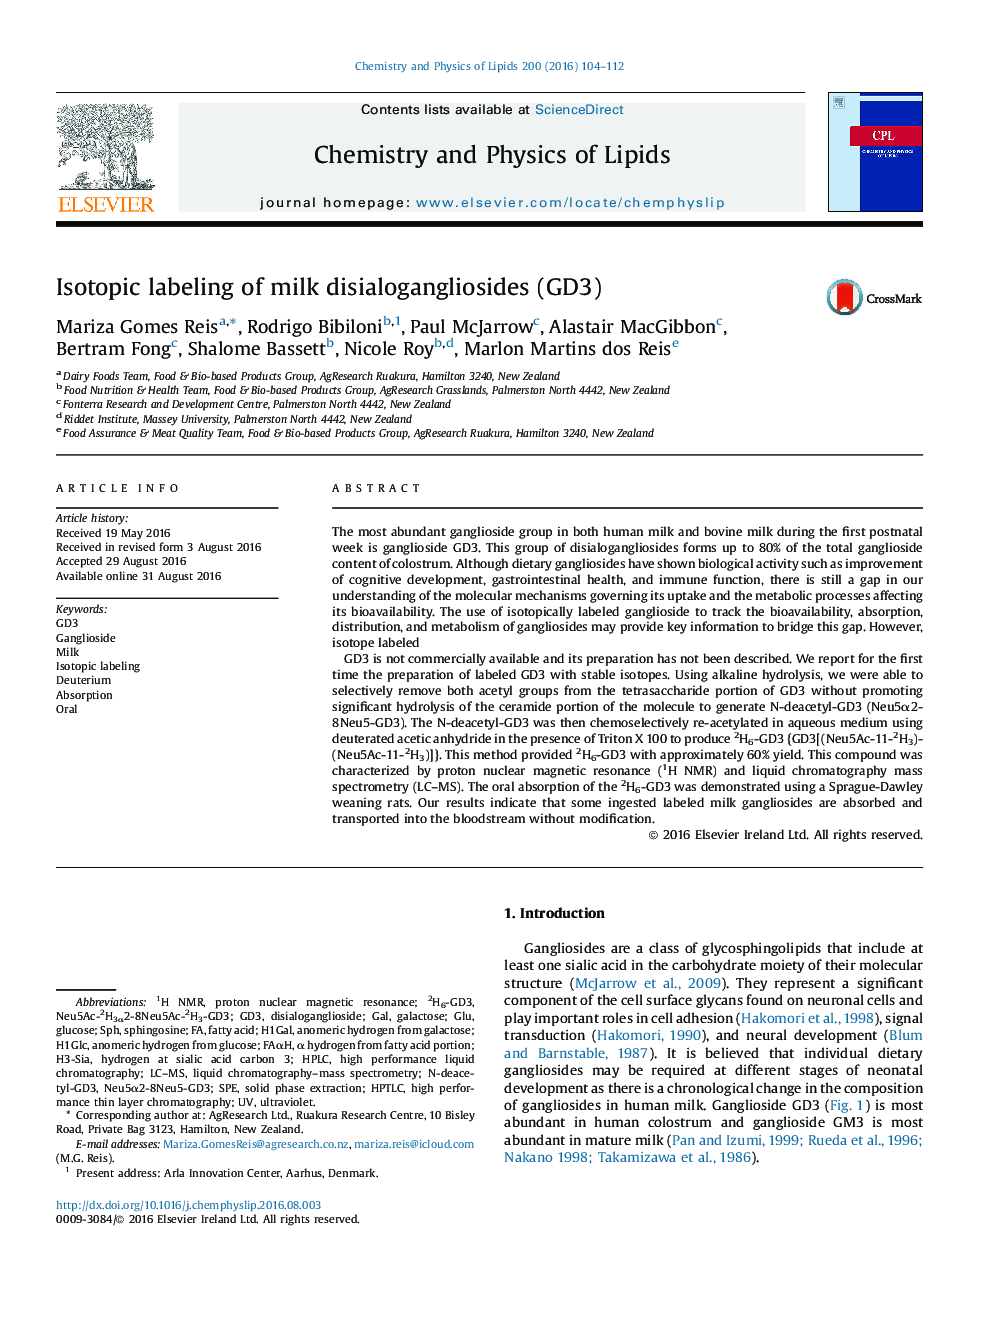 Isotopic labeling of milk disialogangliosides (GD3)